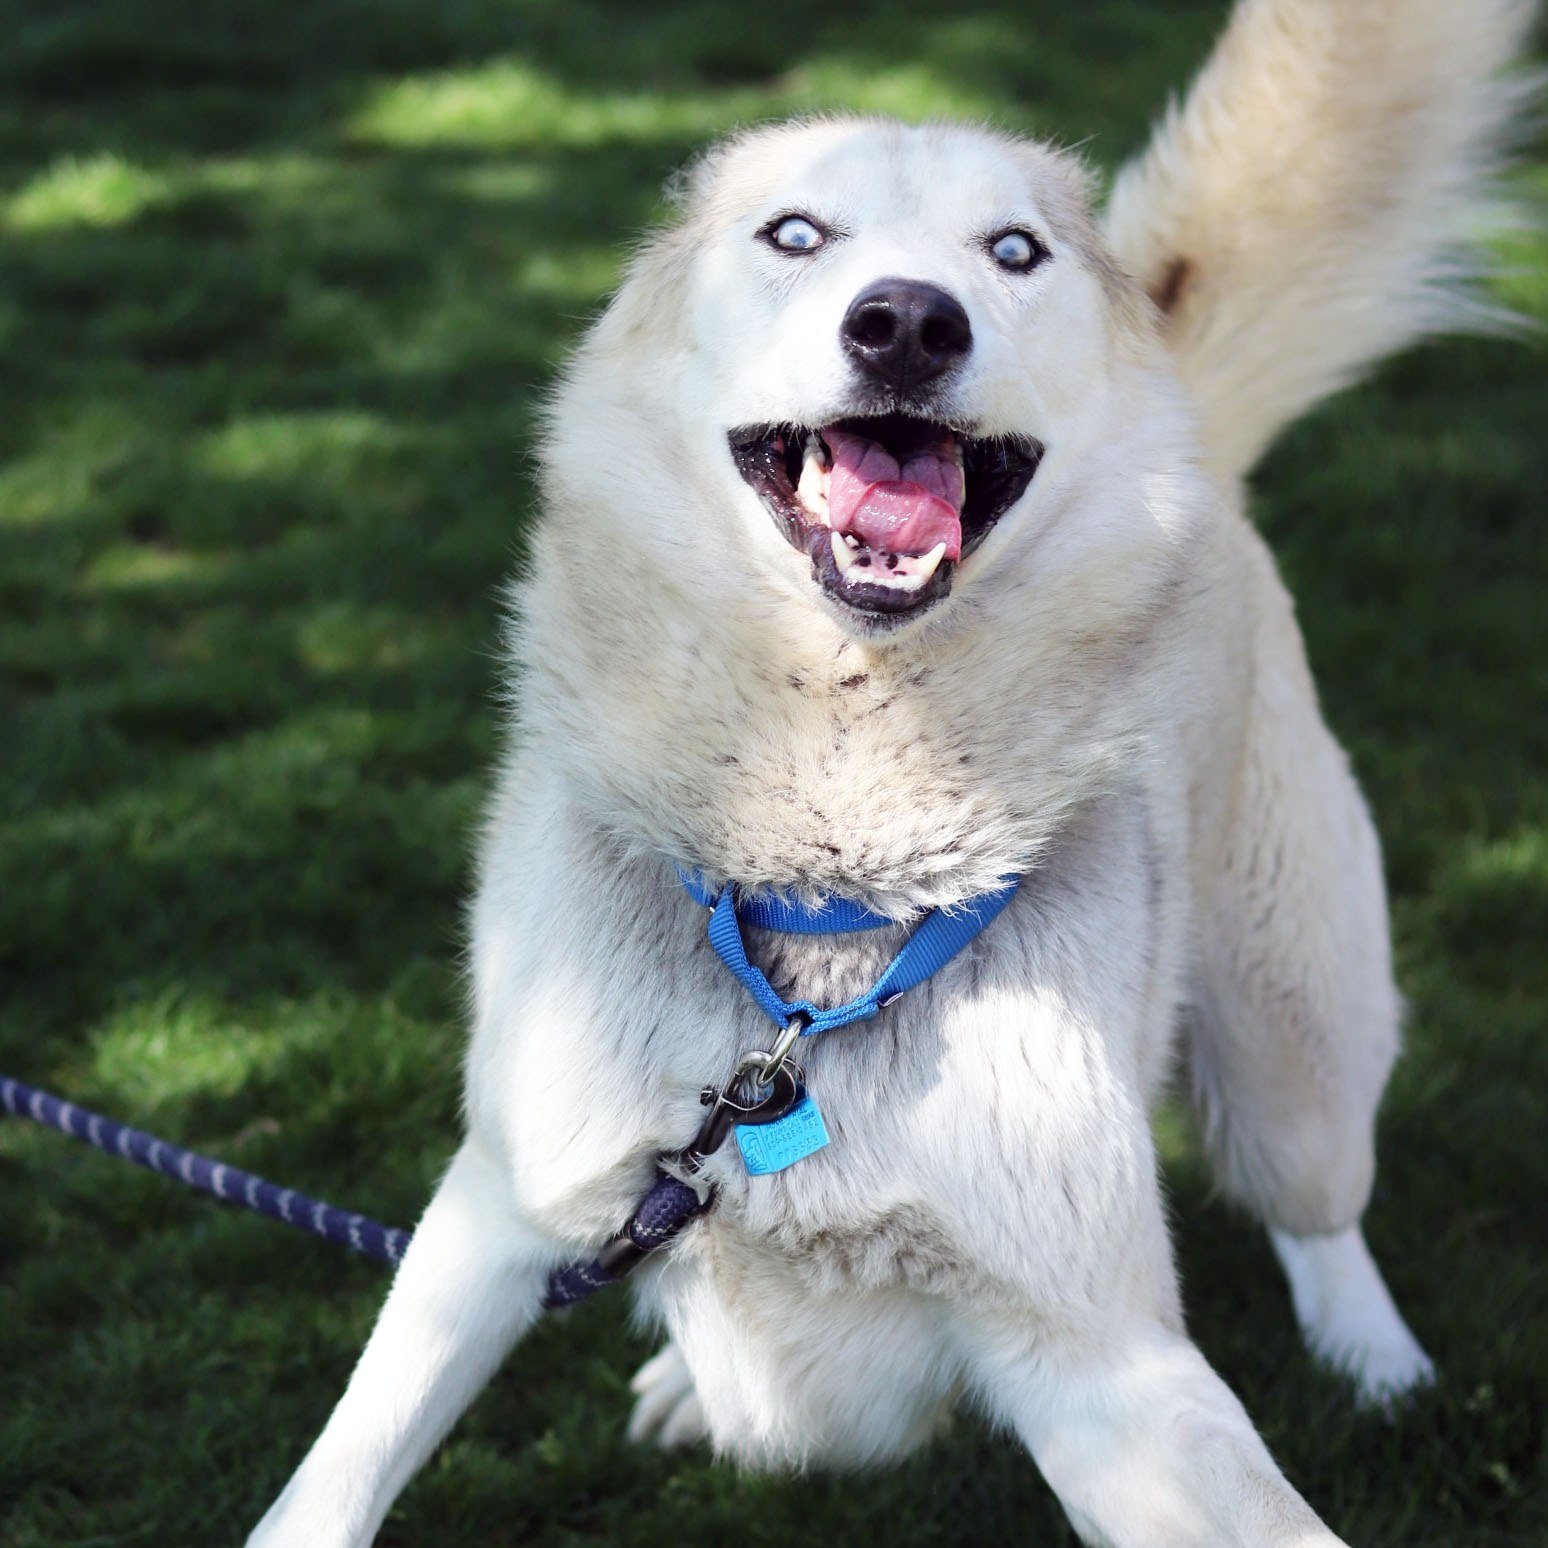 Meet Dublin! The lovable goofball who can't sit still for photos! 😆

Dublin is an Alaskan Husky/Mix, a happy boy eagerly awaiting his forever home here at the Blue Mountain Humane Society.

He came in as a stray, so not much is known about his histo